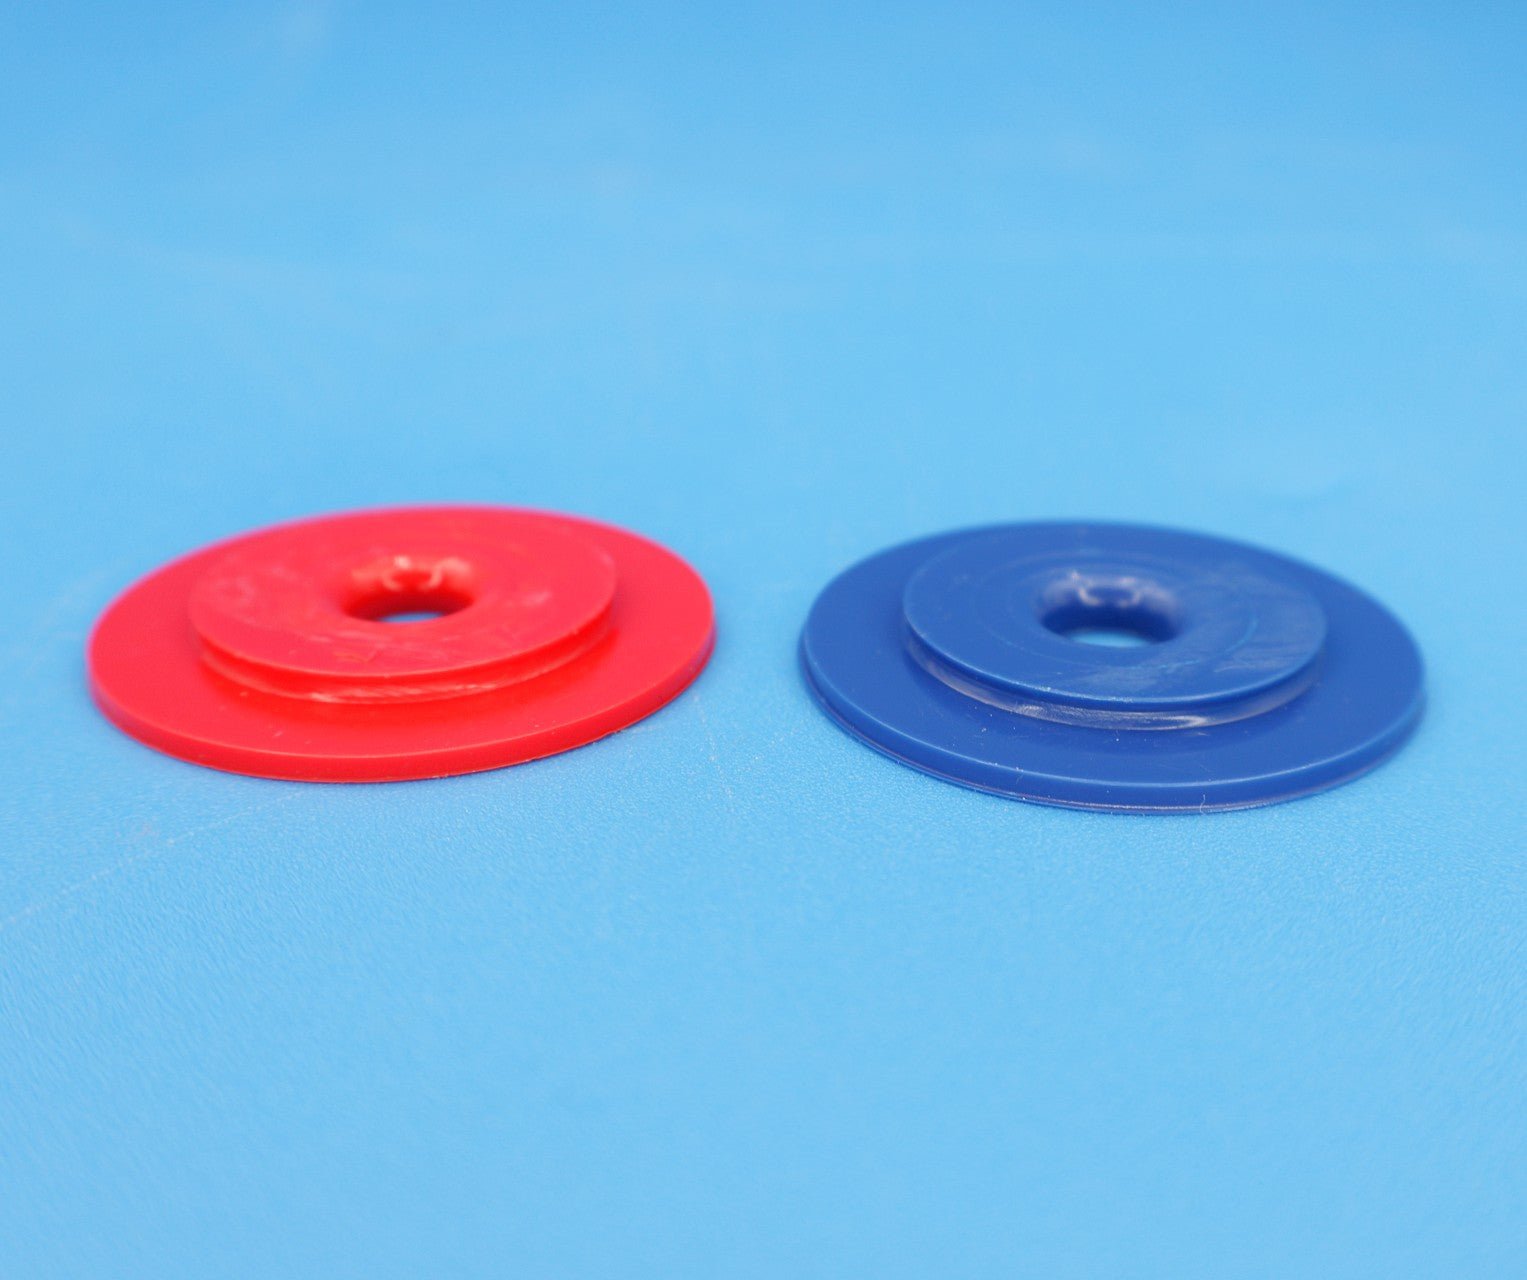 Jandy (Polaris) Vac-Sweep Red & Blue Restrictor Disk for Wall Fittings 10-112-00 - Cleaner Parts - img-1